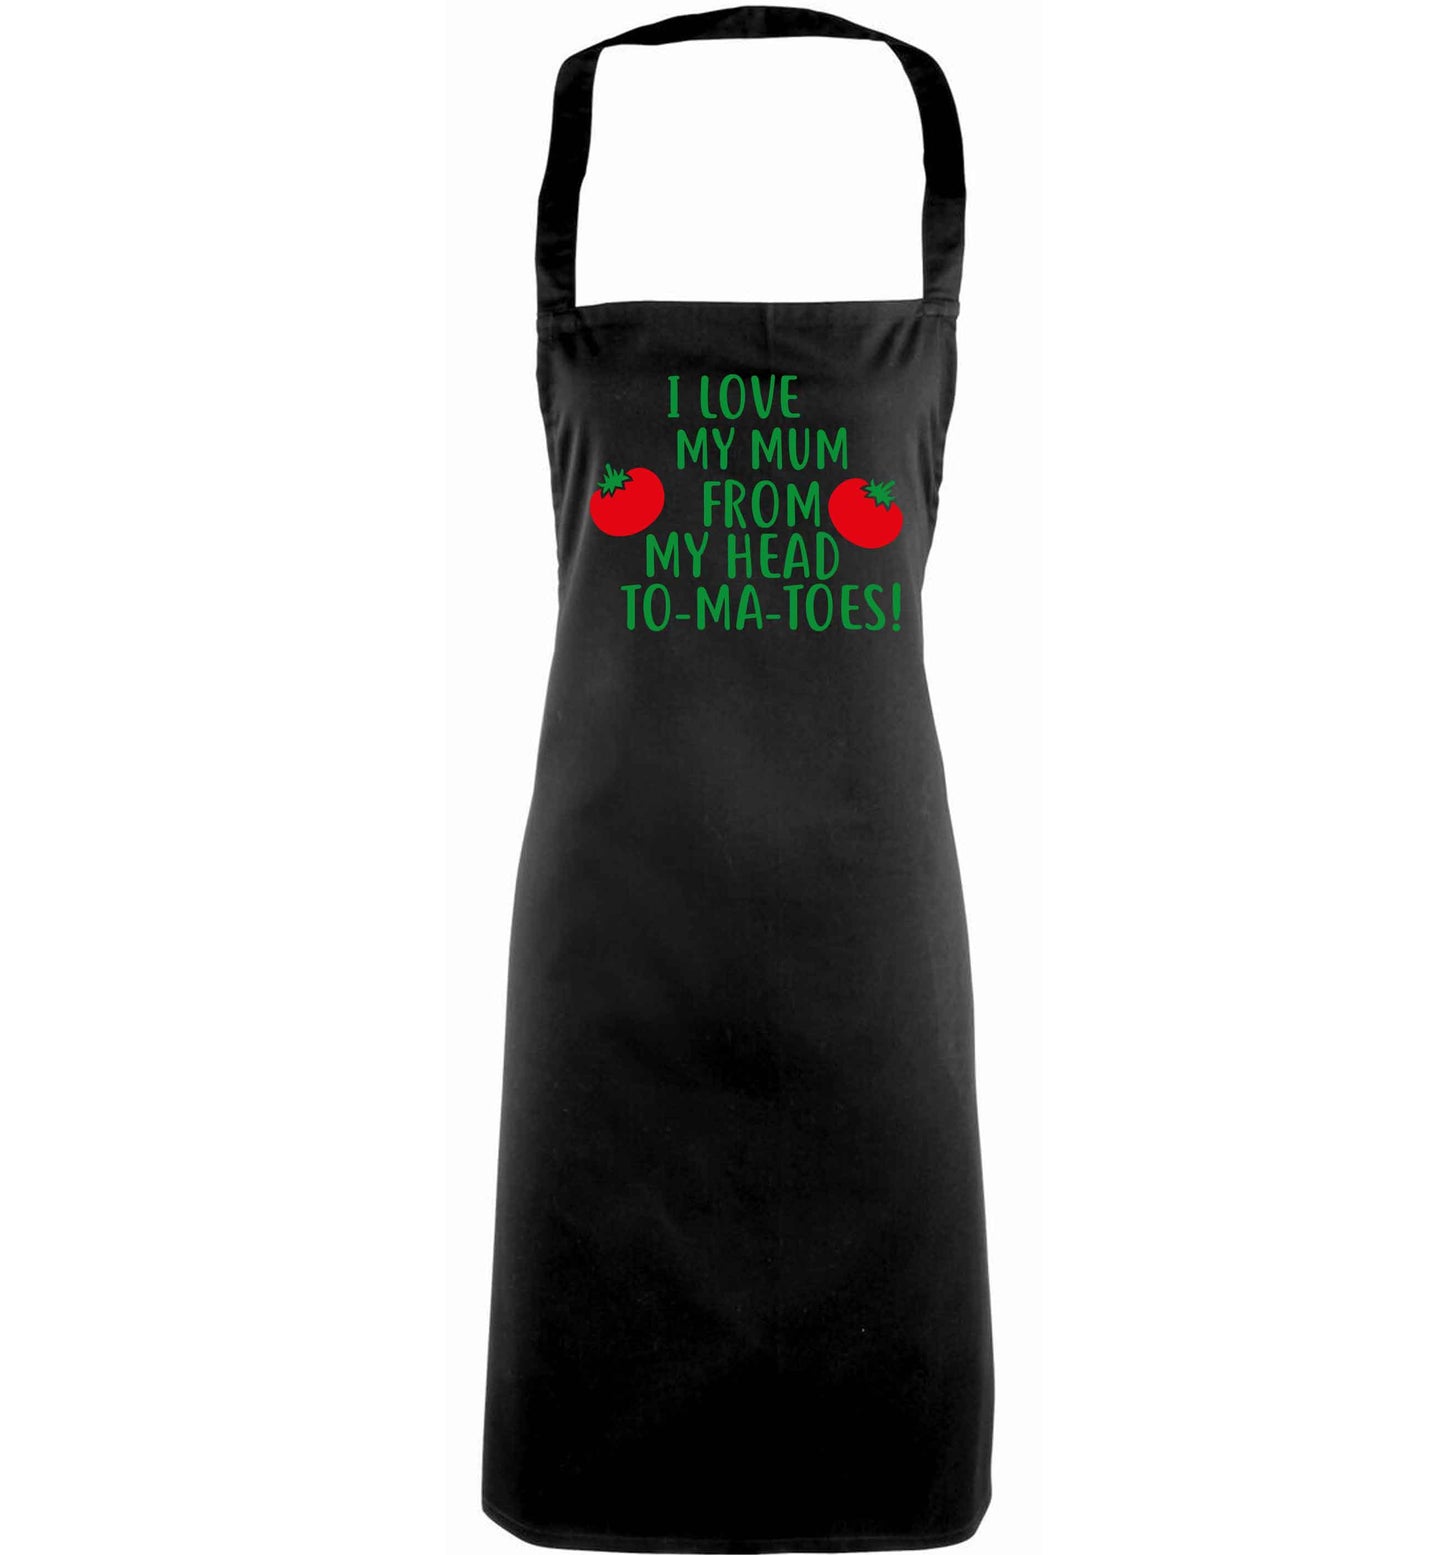 I love my mum from my head to-my-toes! adults black apron